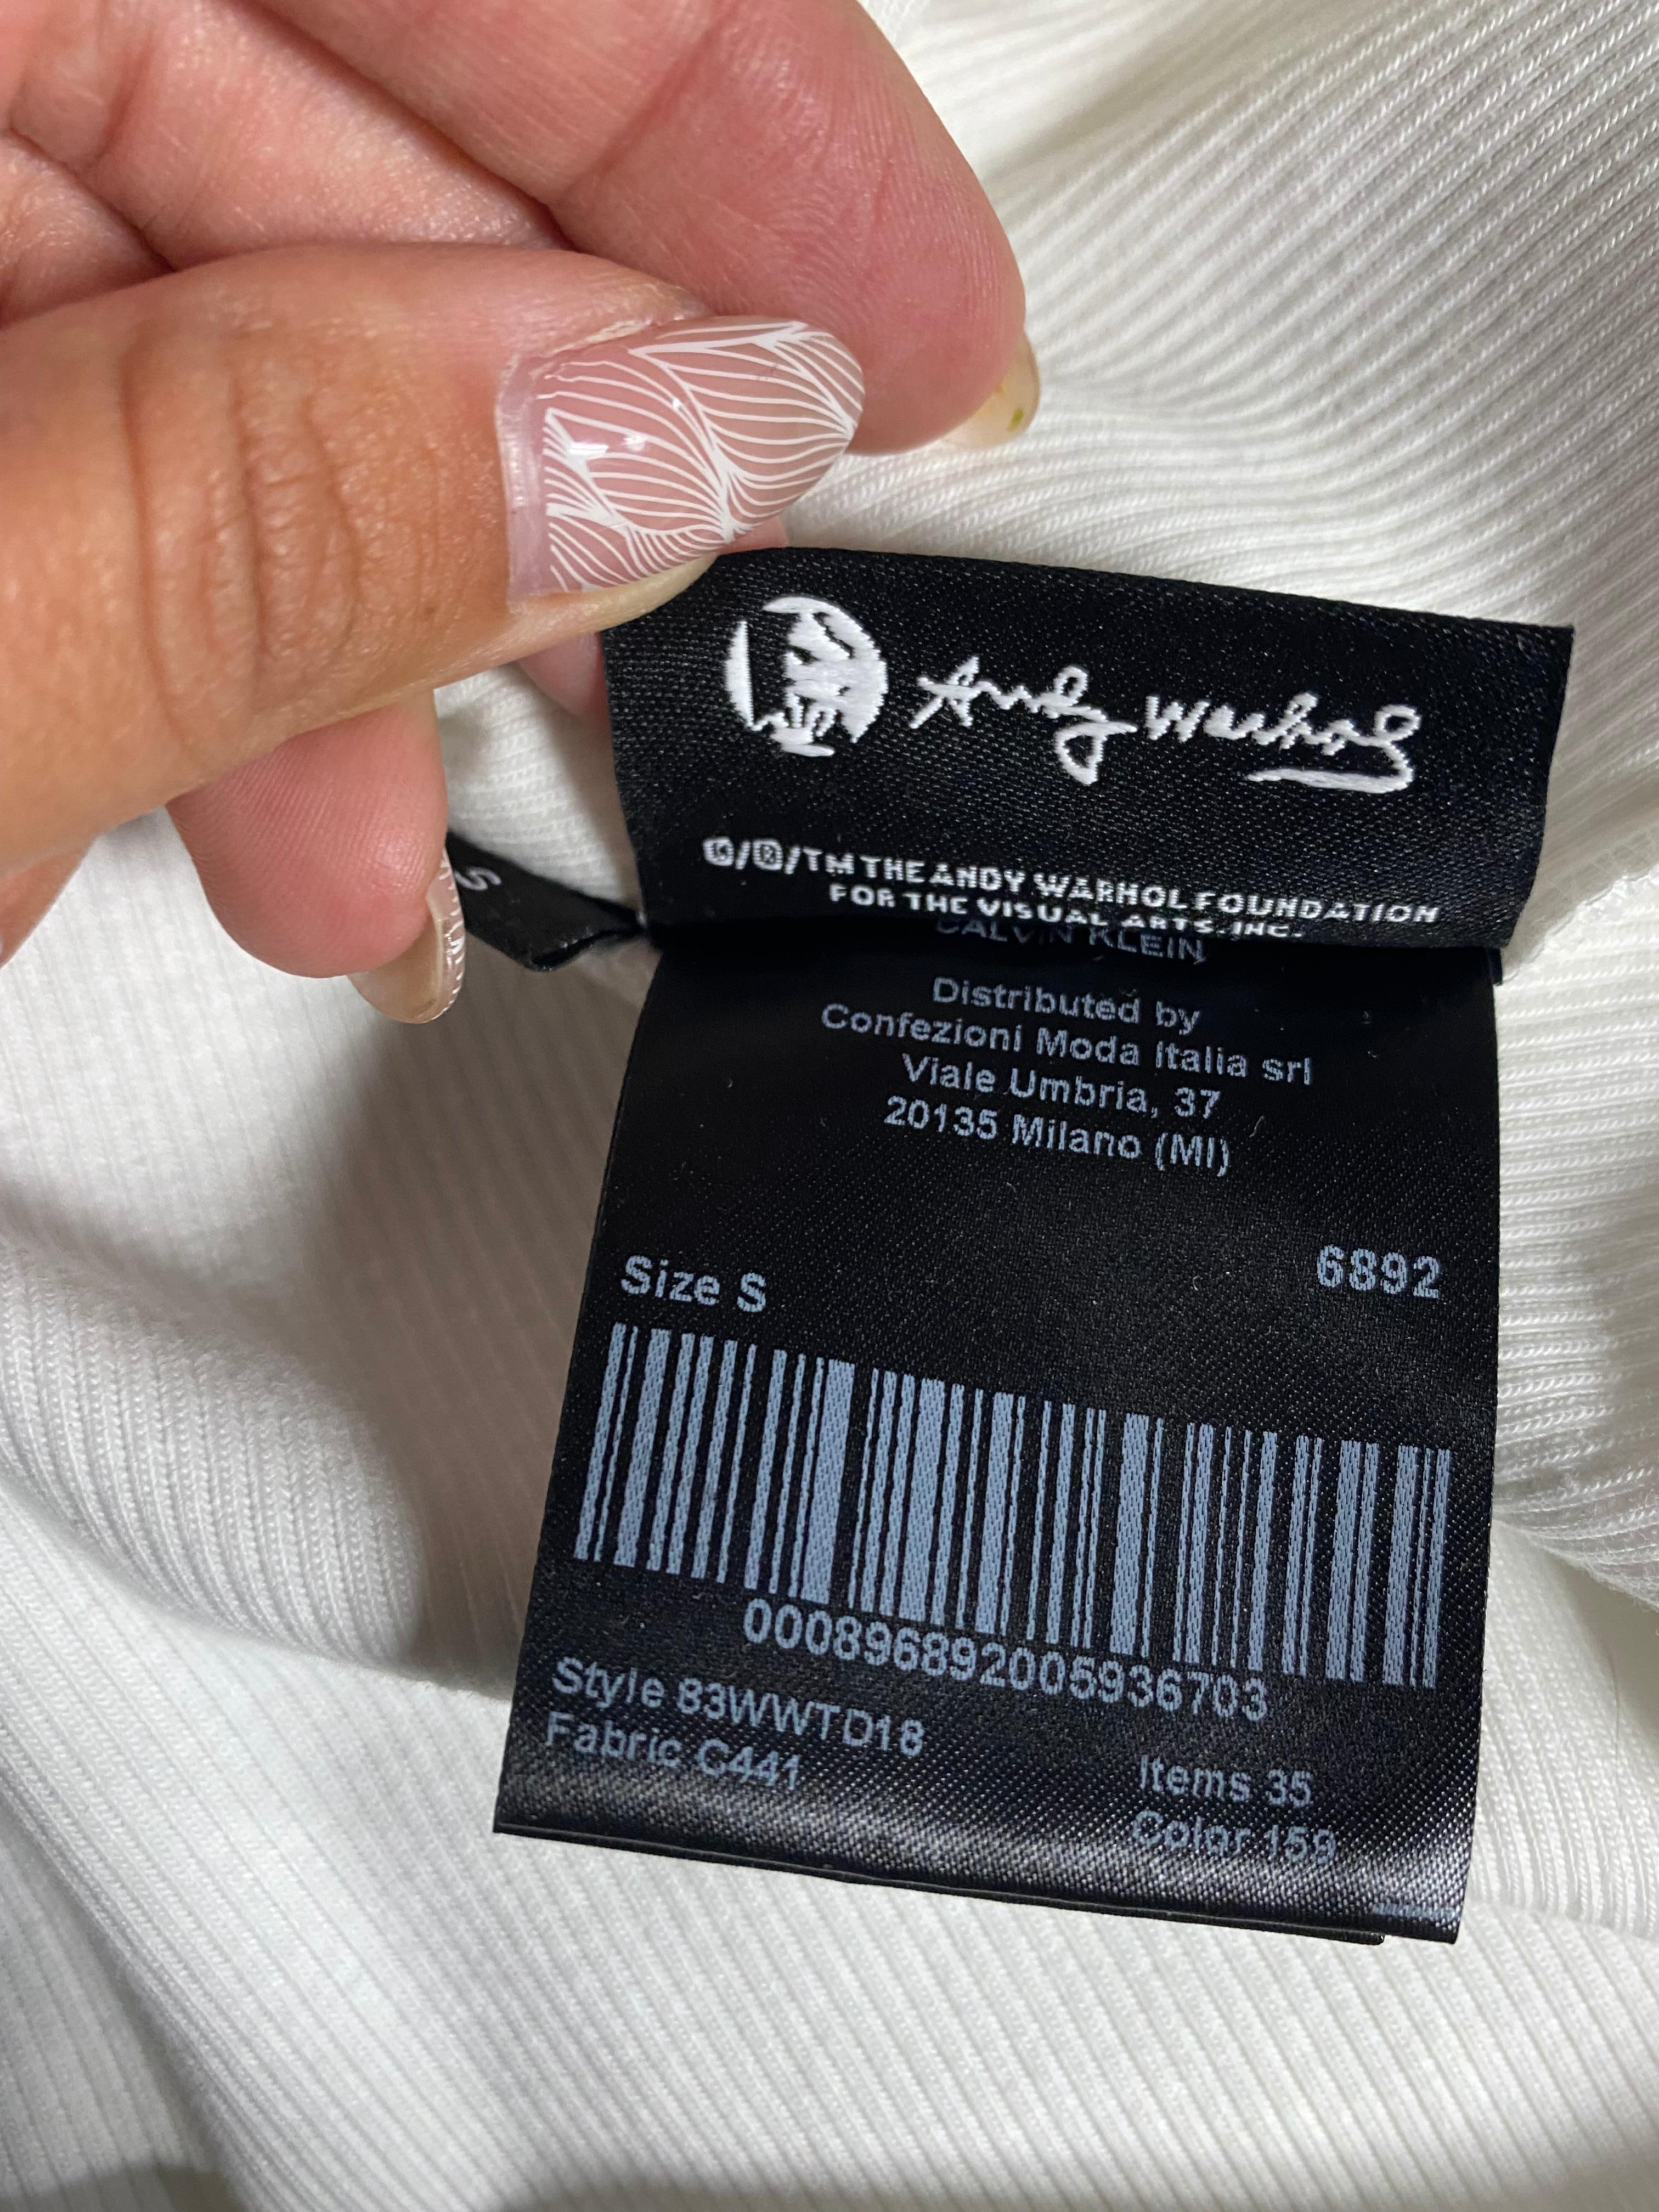 Calvin Klein Andy Warhol White Tank Top, Size Small In Excellent Condition For Sale In Beverly Hills, CA